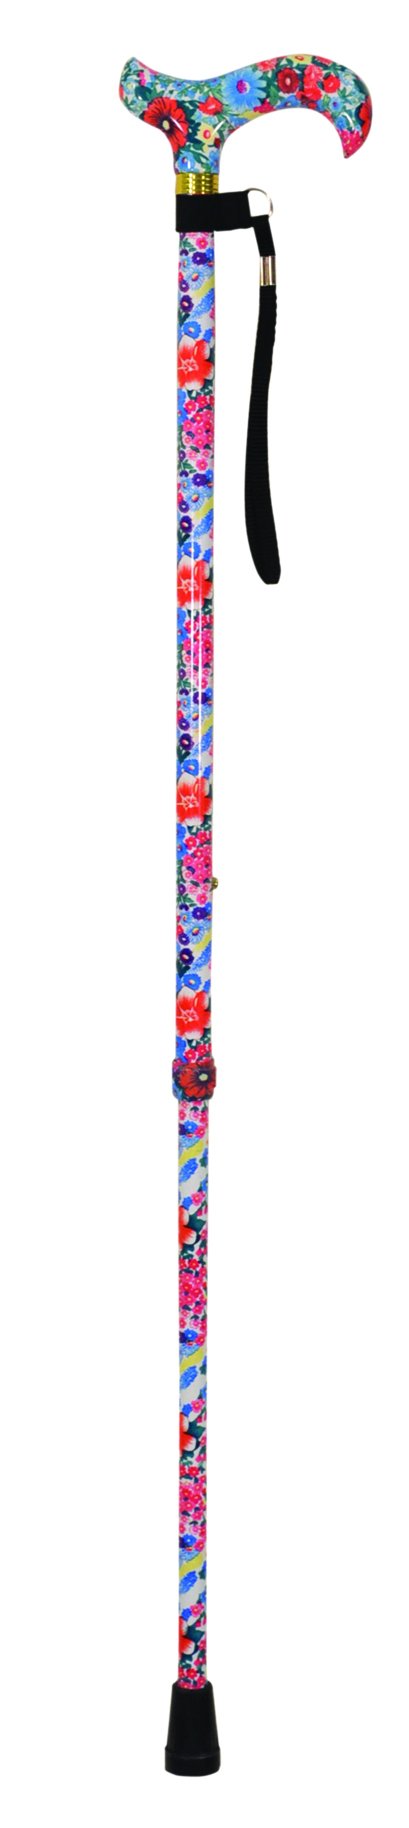 Deluxe Patterned Walking Cane Floral 